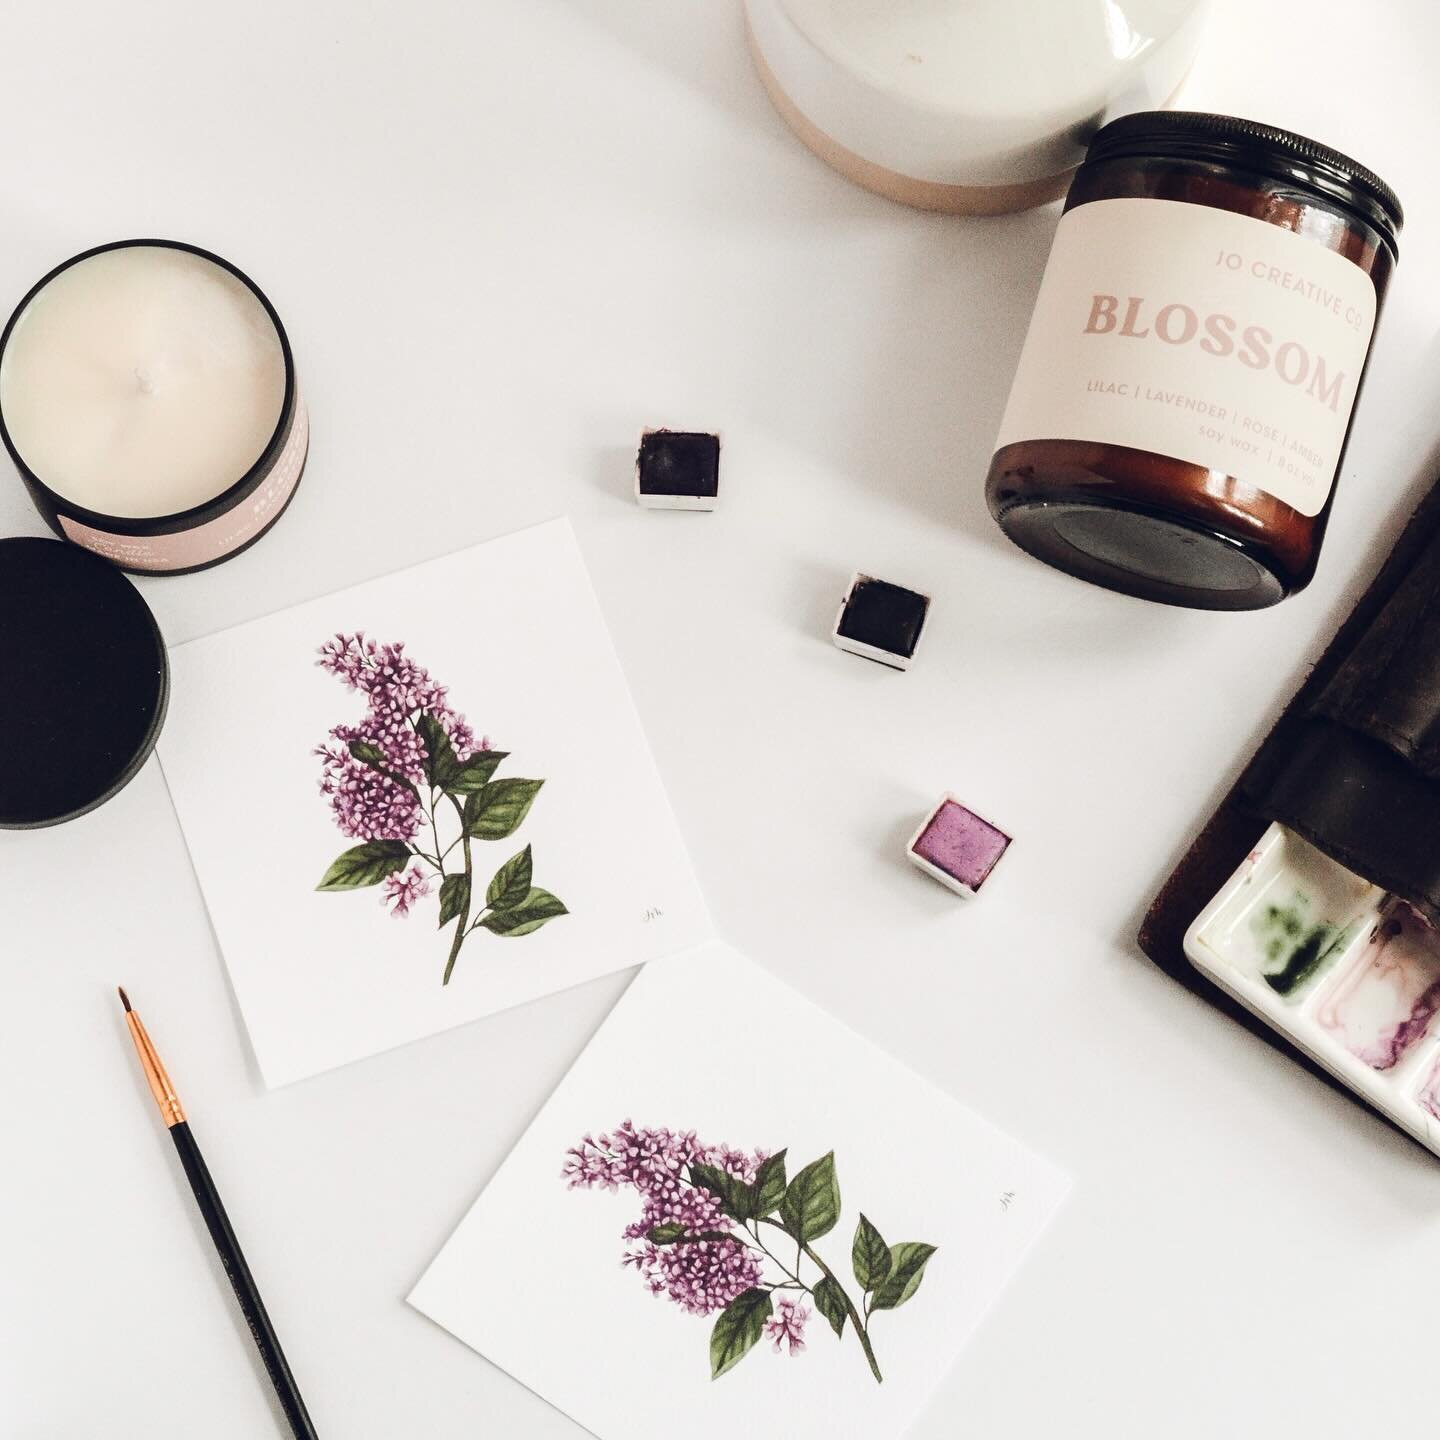 This spring collection brings new scents and ideas for my business. In the past, I used to have my art on my candle labels, but it got to be WAY to much work with every new scents I created, so I switched to simple modern labels.

Yet, ever since, I&